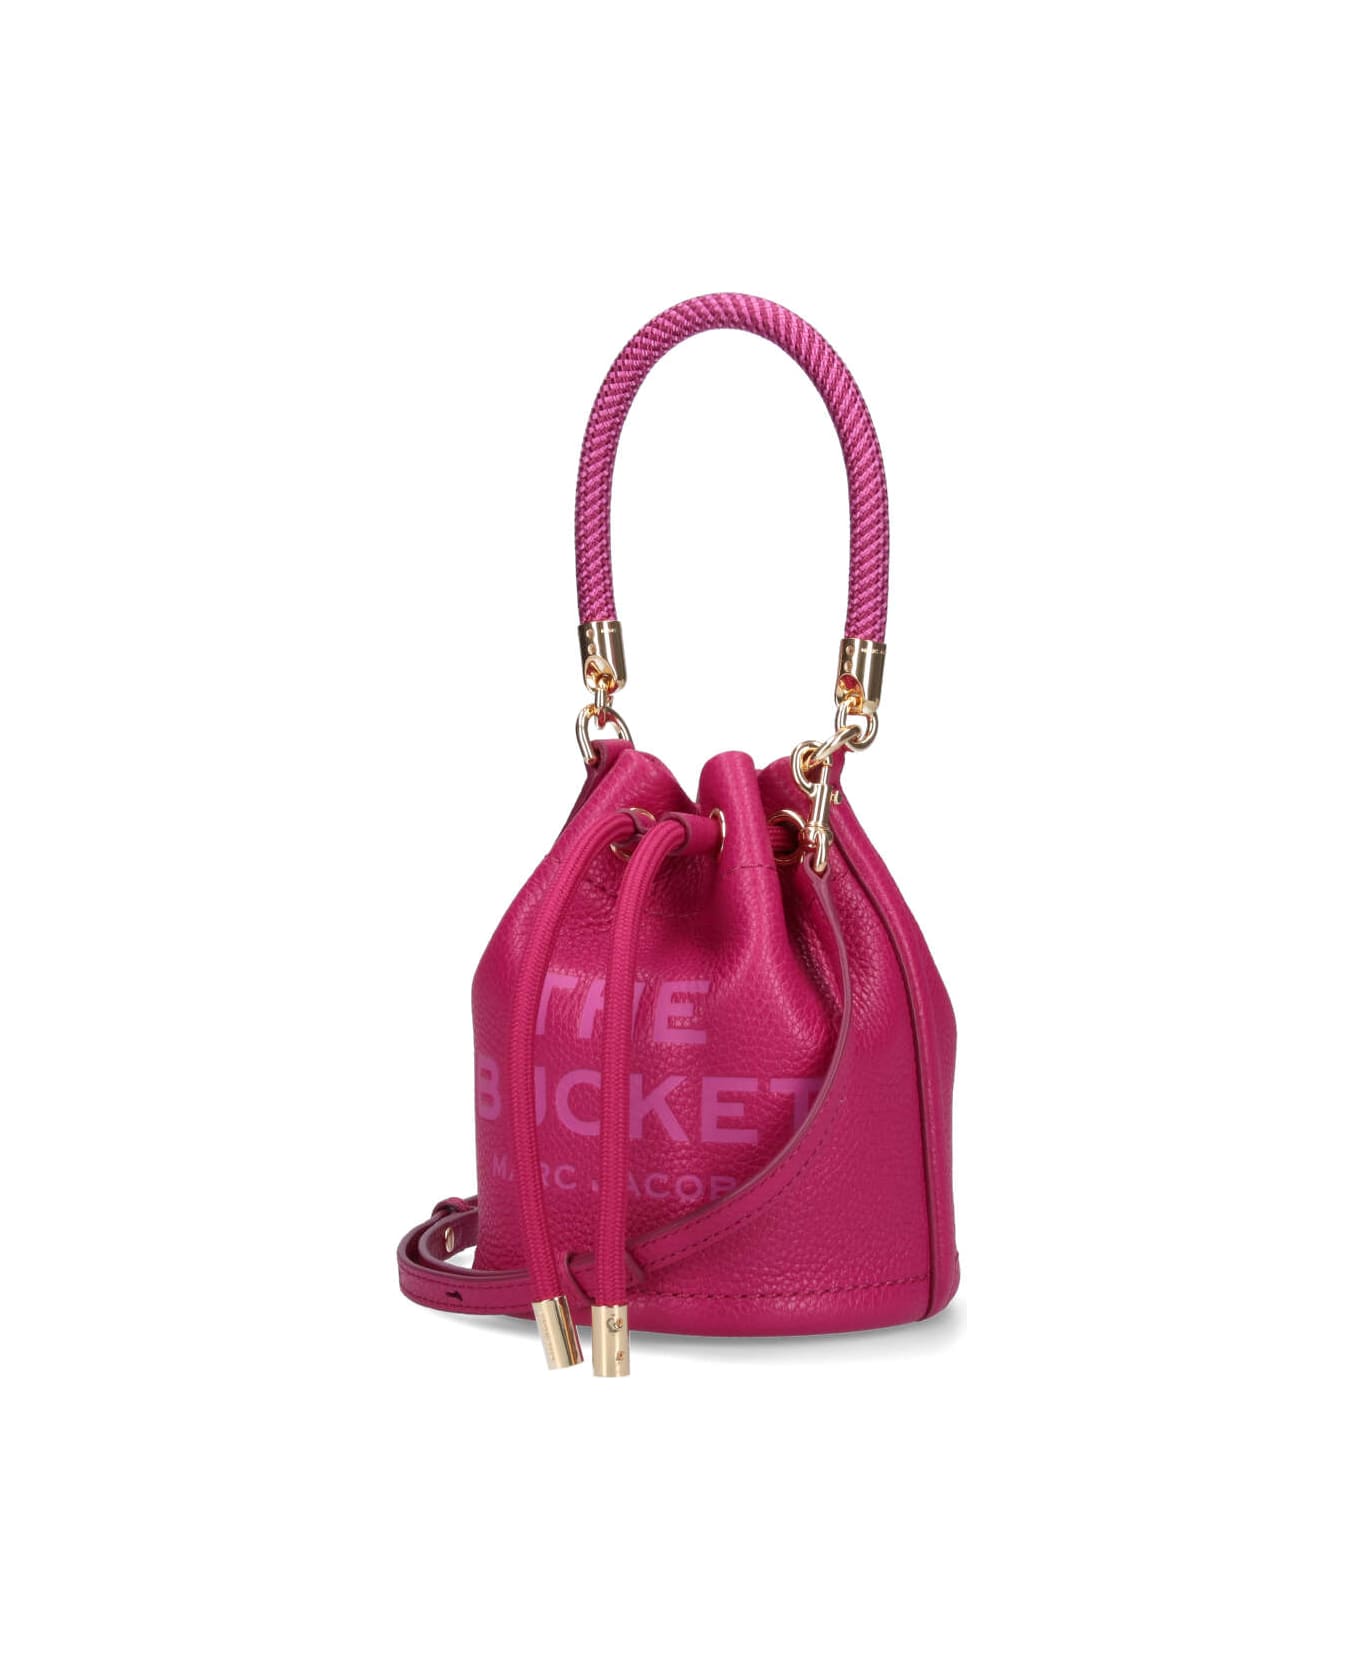 Marc Jacobs The Micro Bucket Bag - Pink トートバッグ